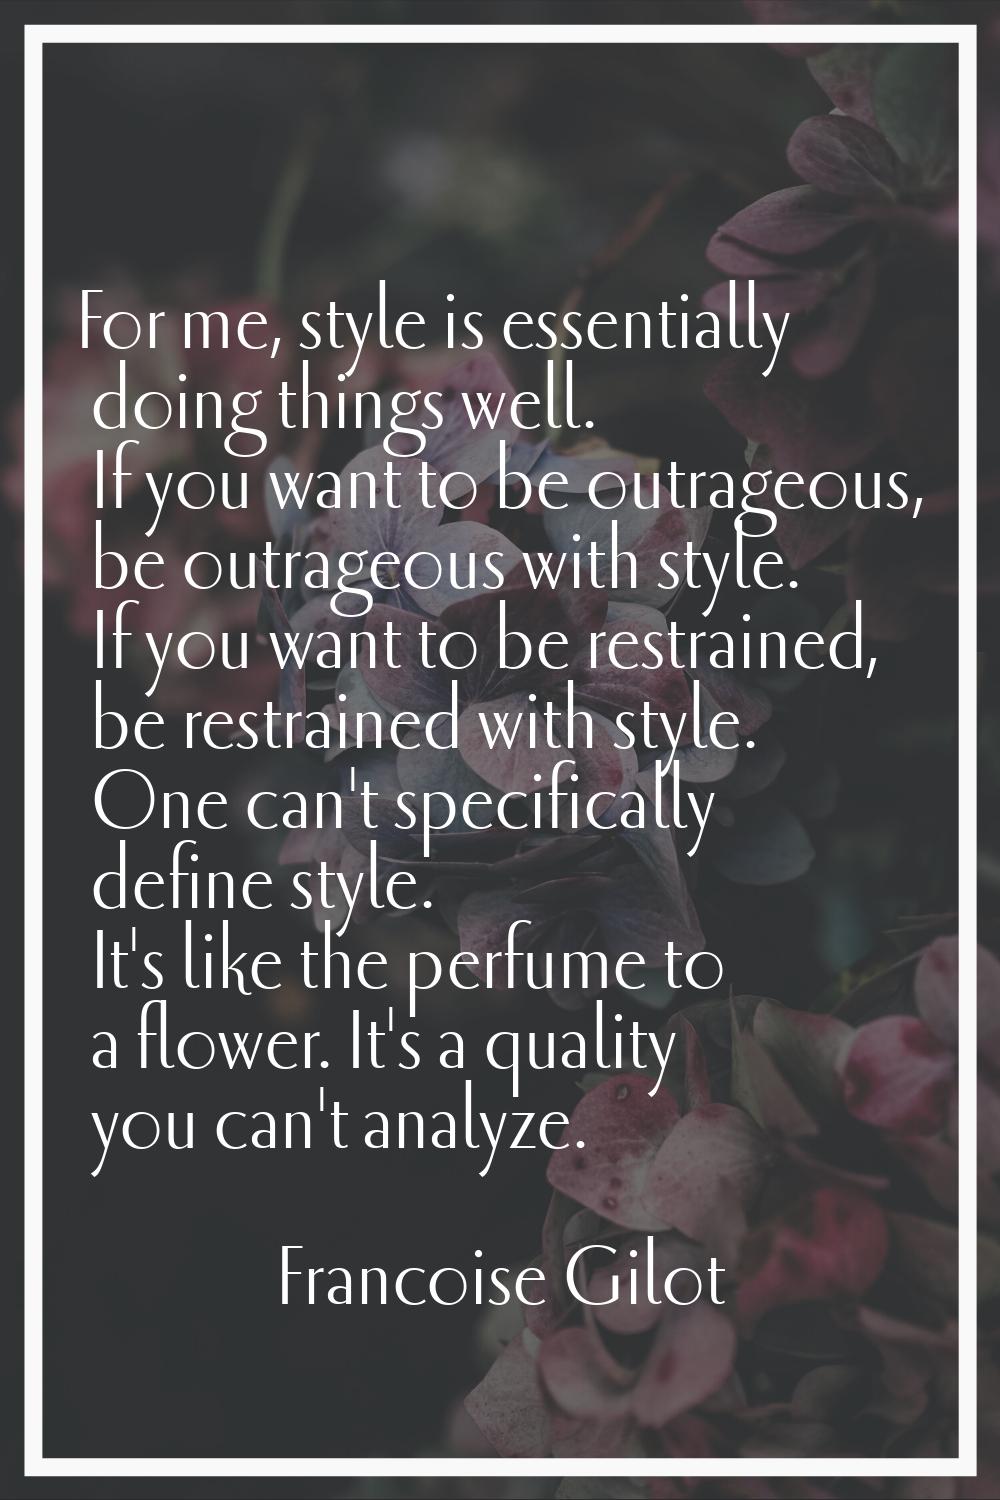 For me, style is essentially doing things well. If you want to be outrageous, be outrageous with st